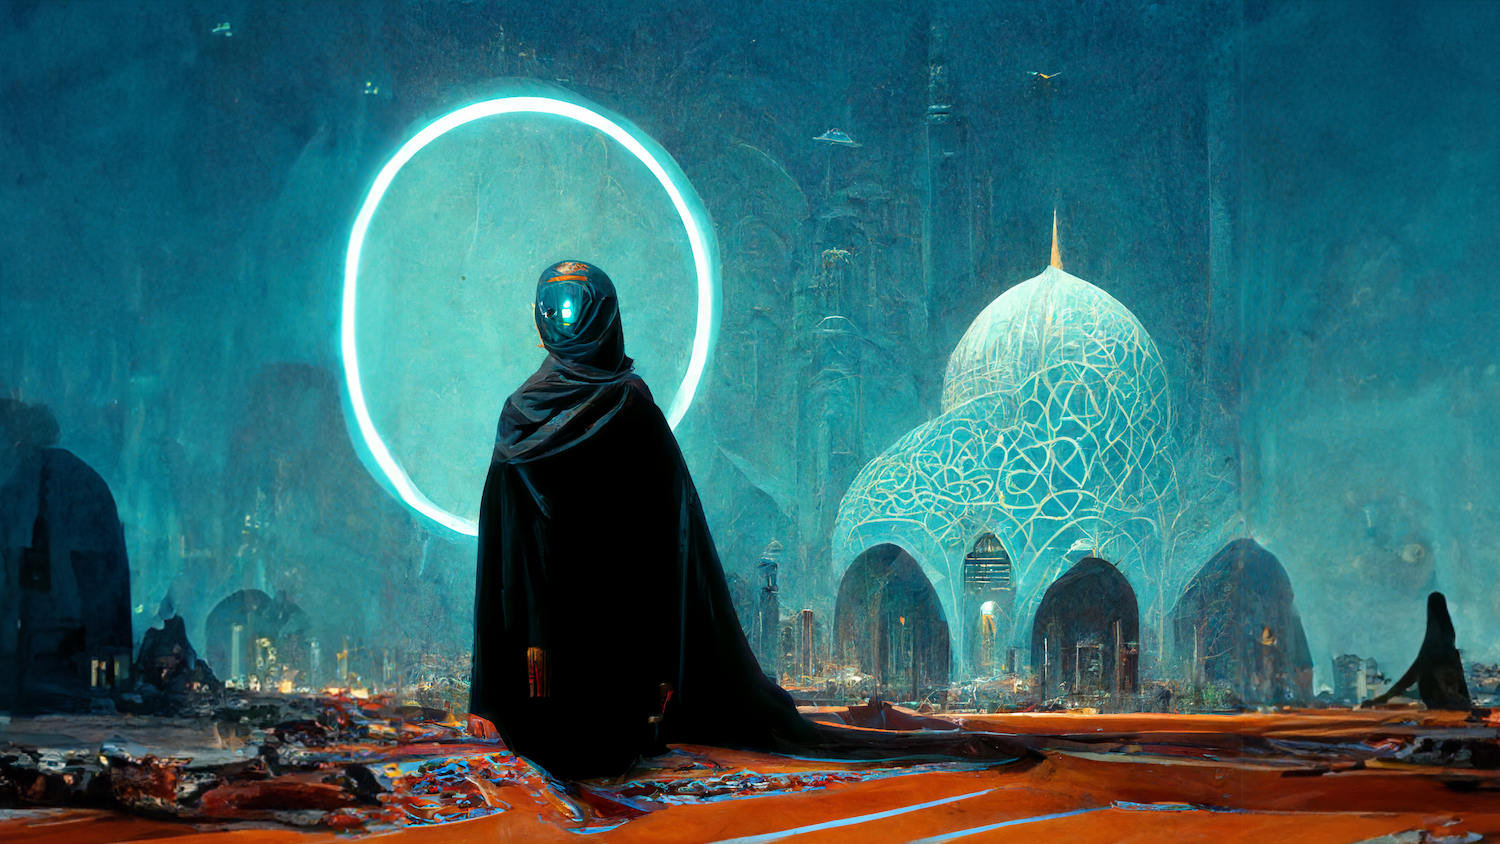 Mid Journey art created by Marc Manley - Islamic futurism